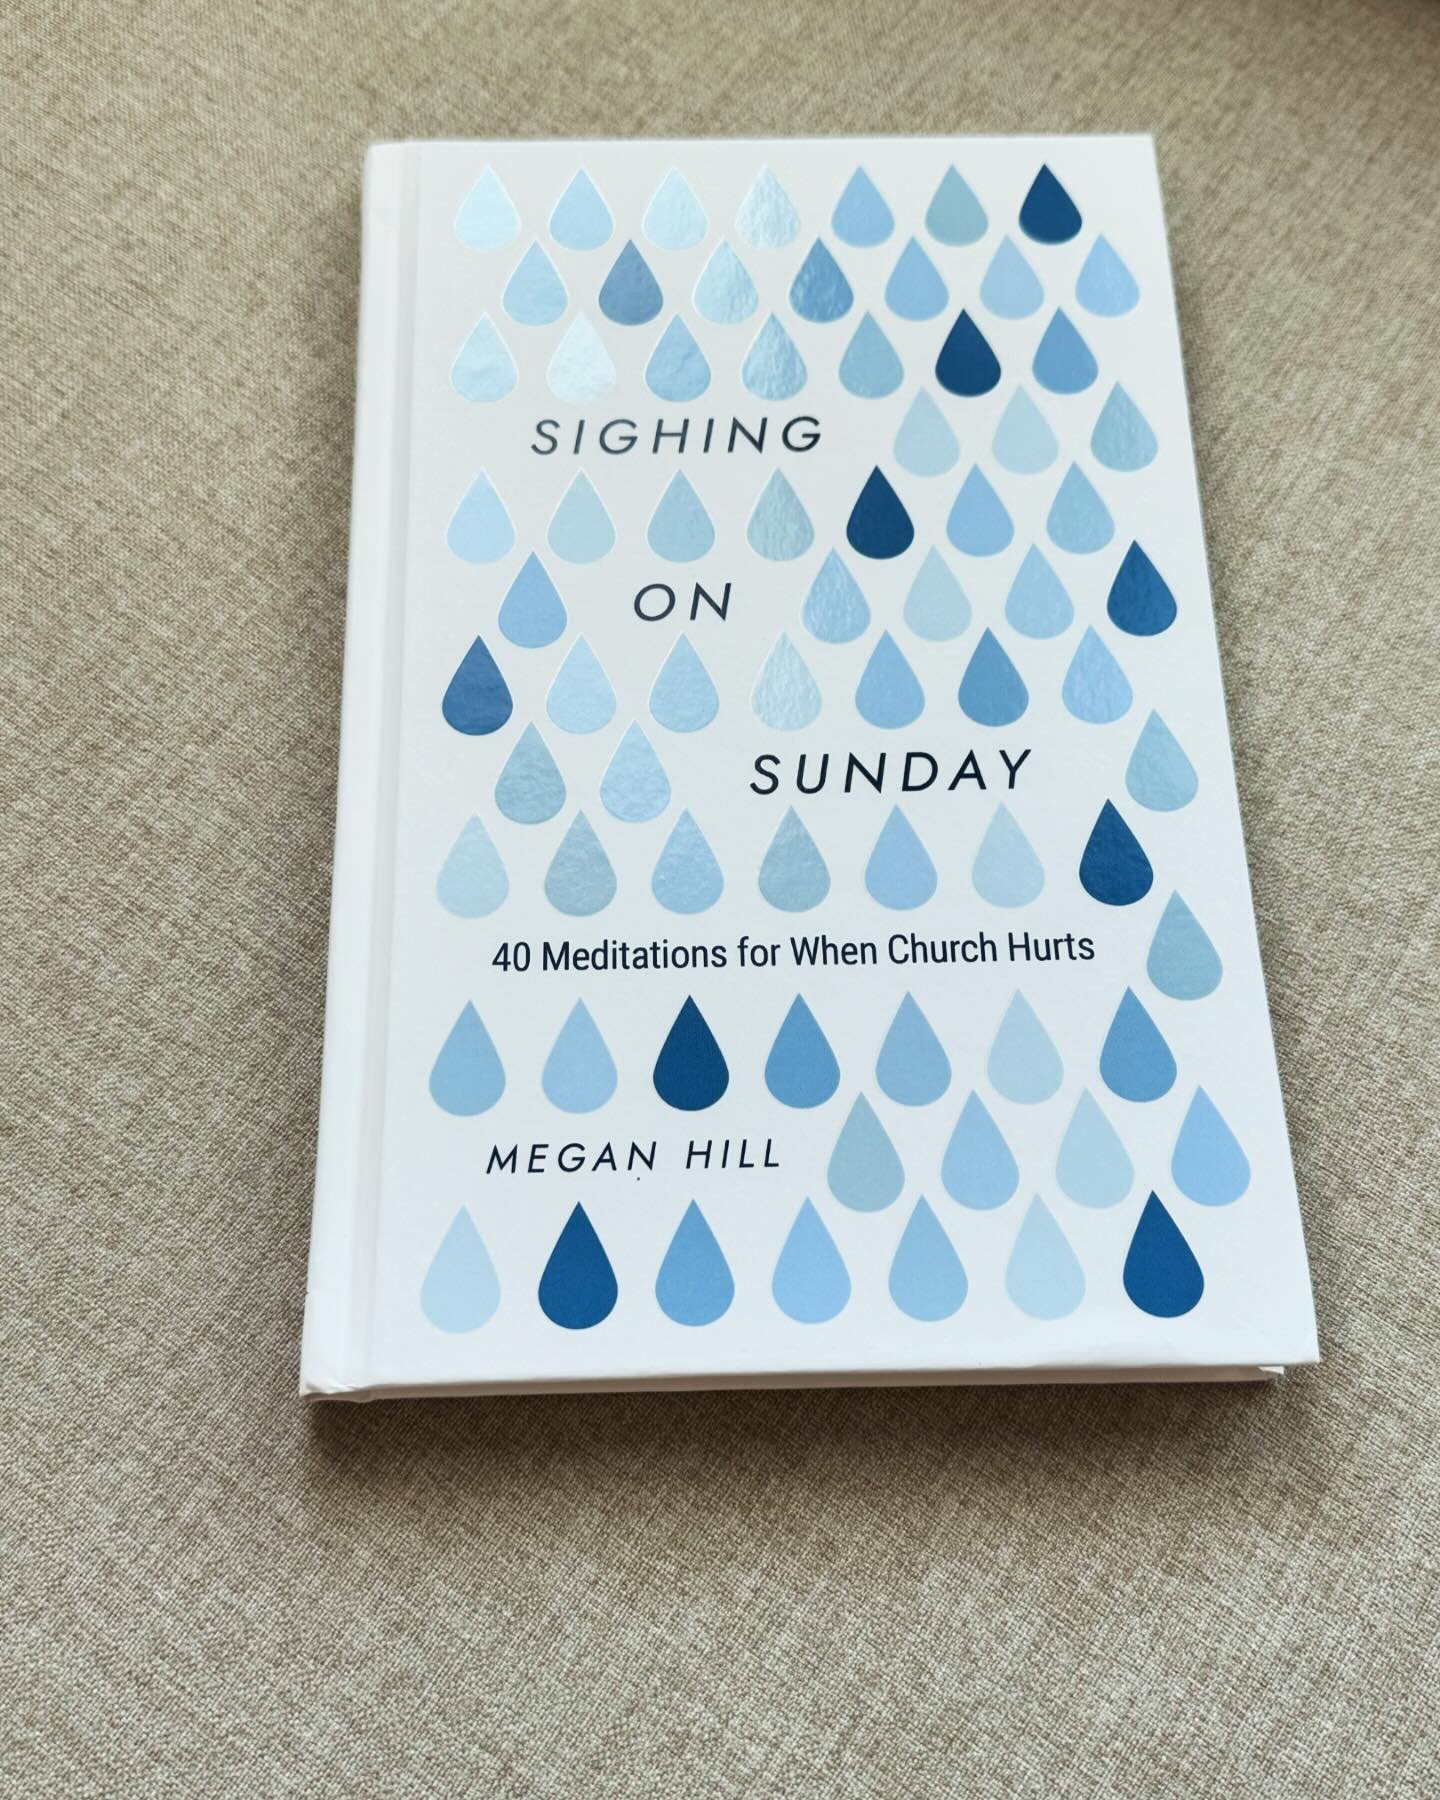 Congrats to @meganevanshill on the release of Sighing on Sunday! This is such an important and timely subject that I know will encourage the church.